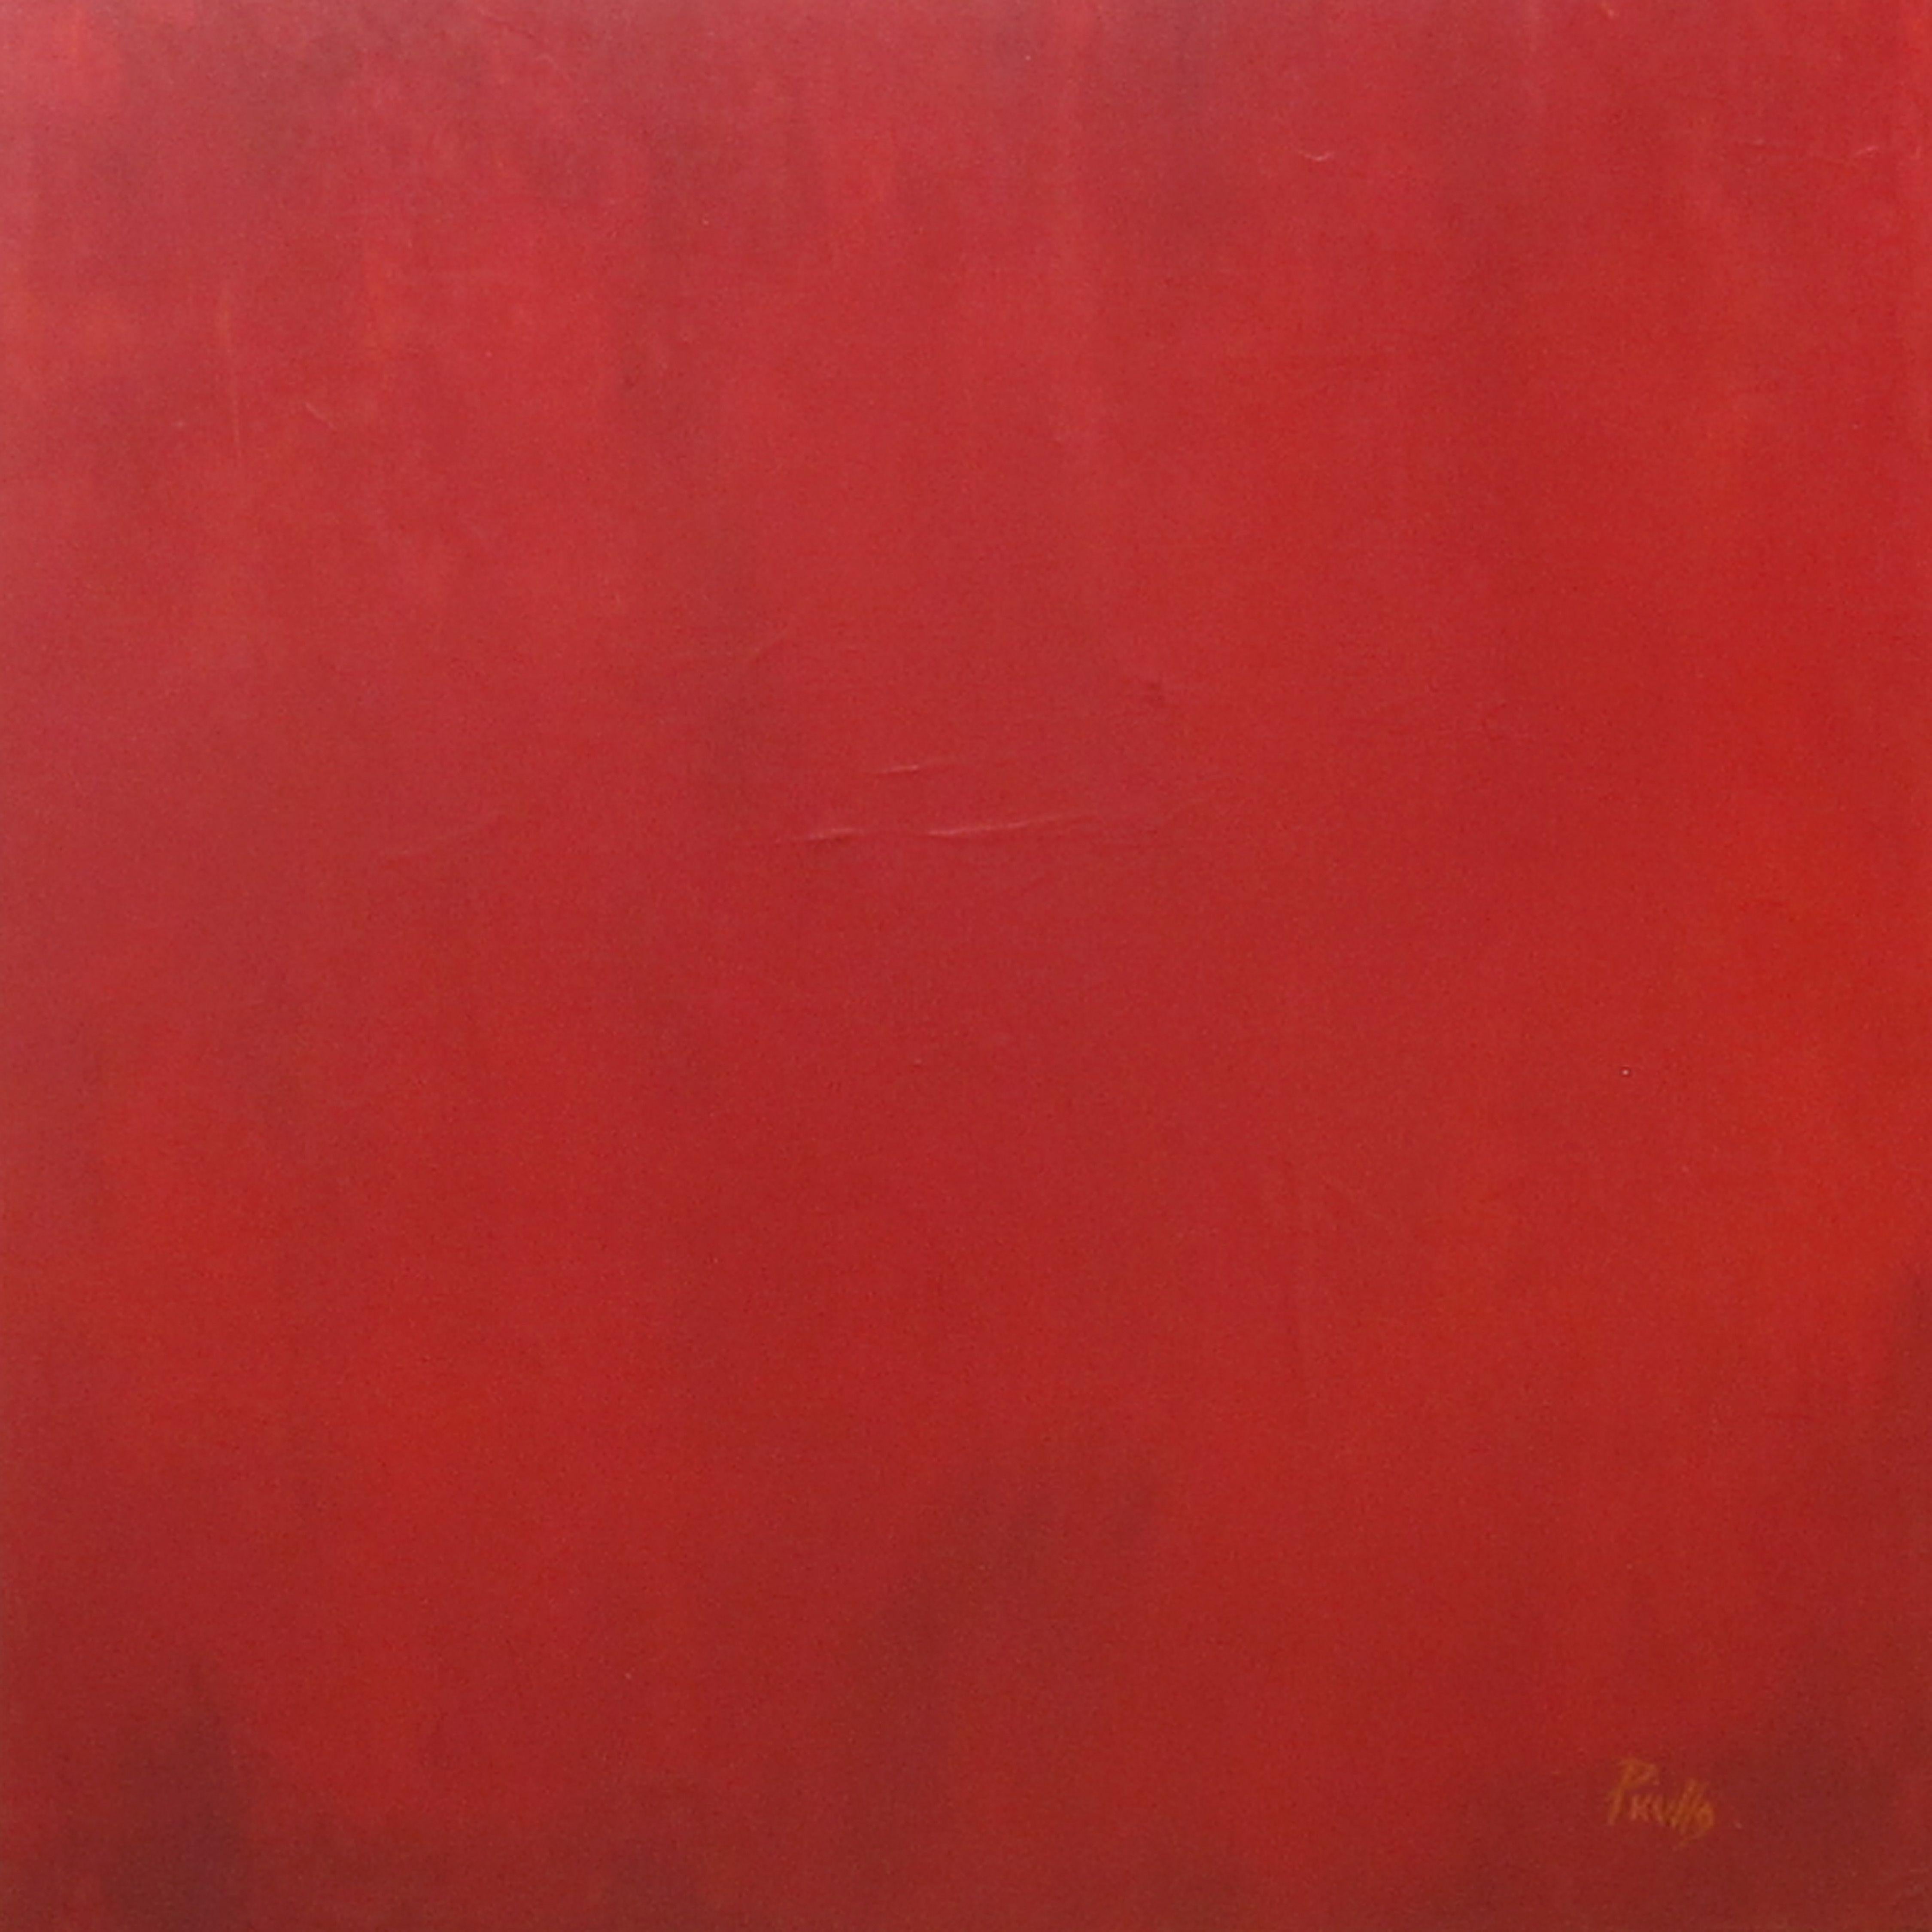 " Red #1 " a 24x 24 acrylic on museum stretched canvas is a painting by joseph piccillo. Red is considered a warm color and one that is often used by artists to put excitement in a piece. My goal in this painting was to use red in a peaceful way. ::